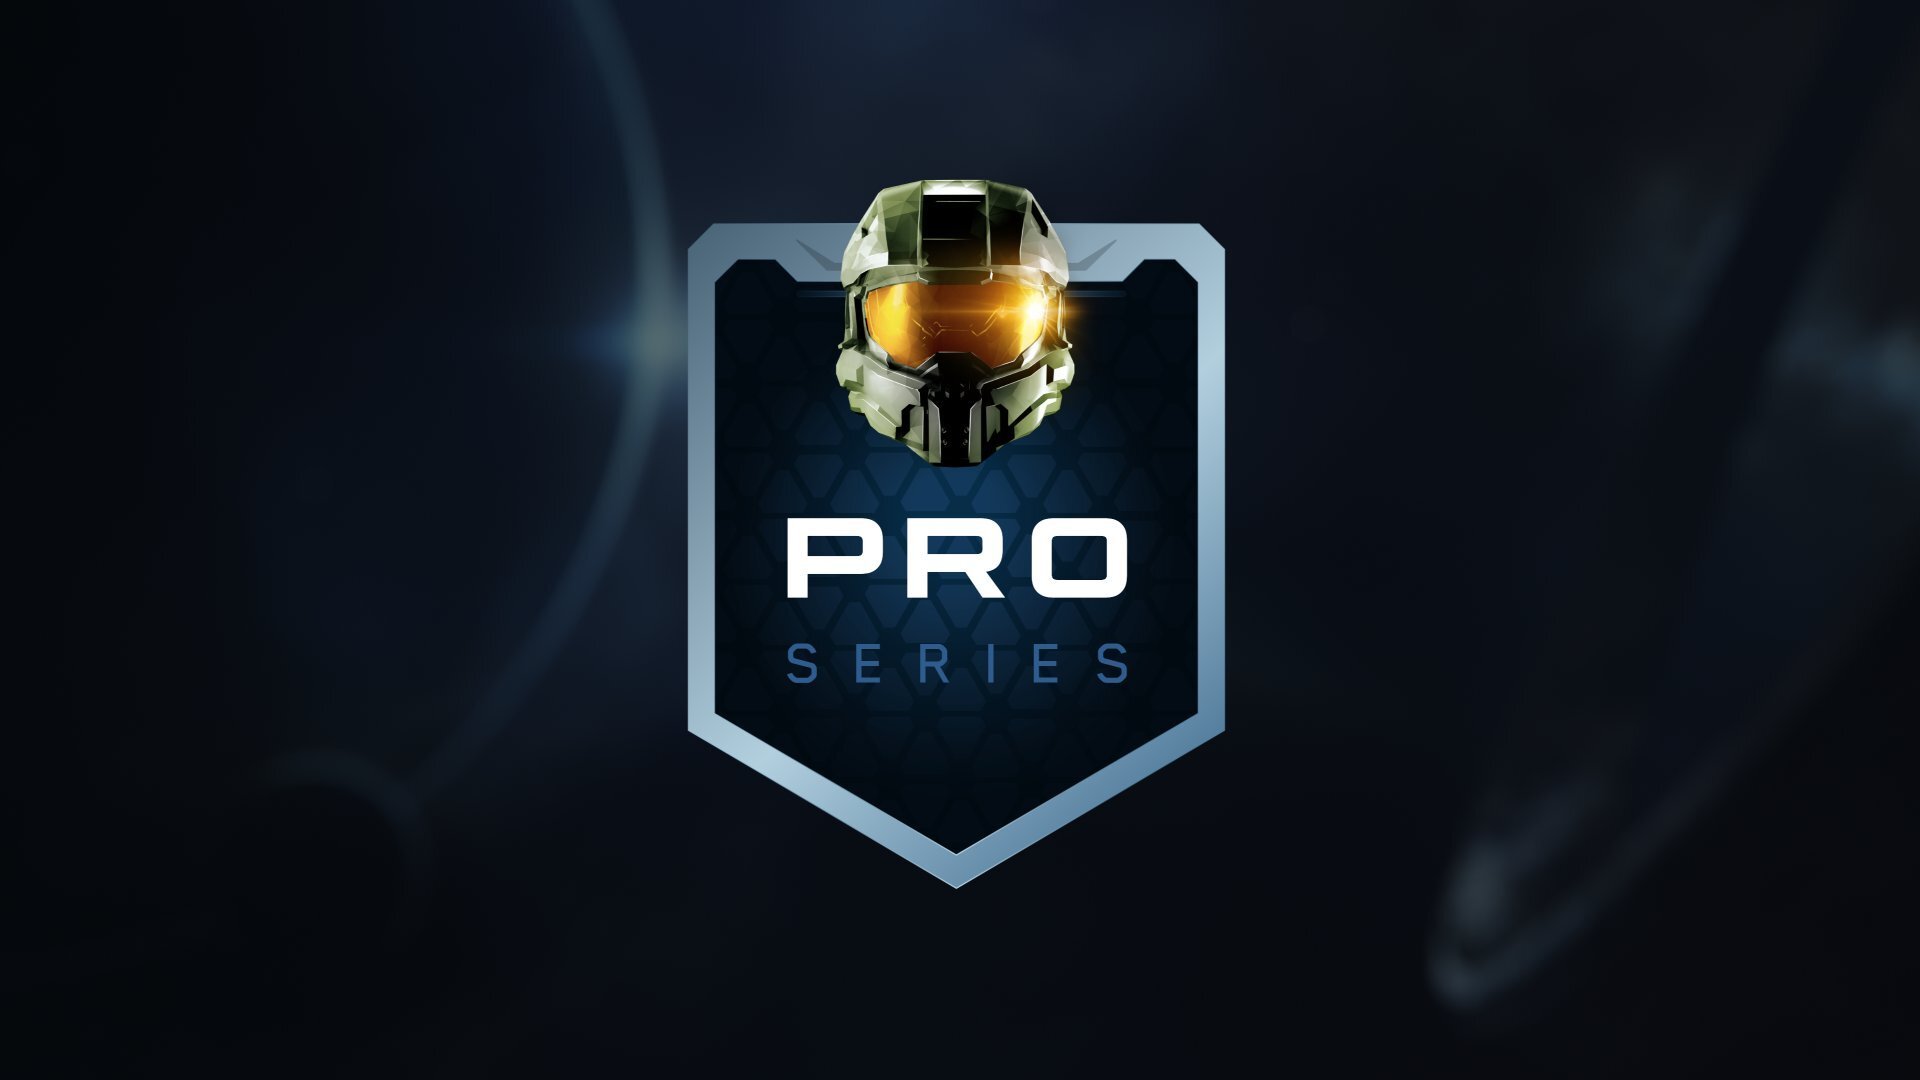 Halo MCC Pro Series announced, begins May 23 Windows Central